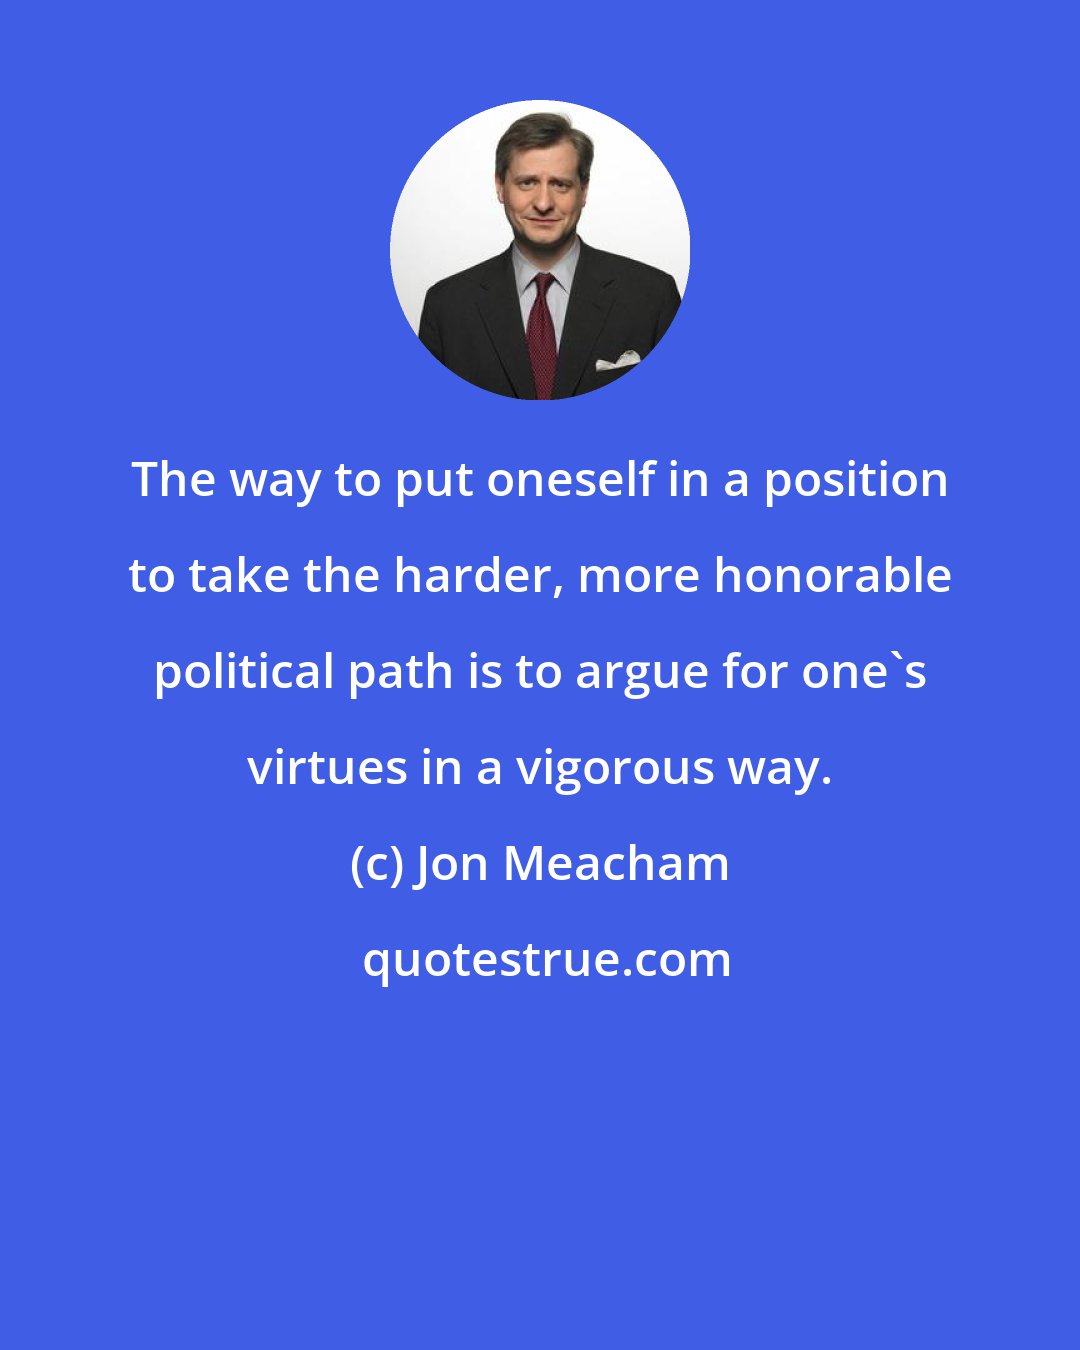 Jon Meacham: The way to put oneself in a position to take the harder, more honorable political path is to argue for one's virtues in a vigorous way.